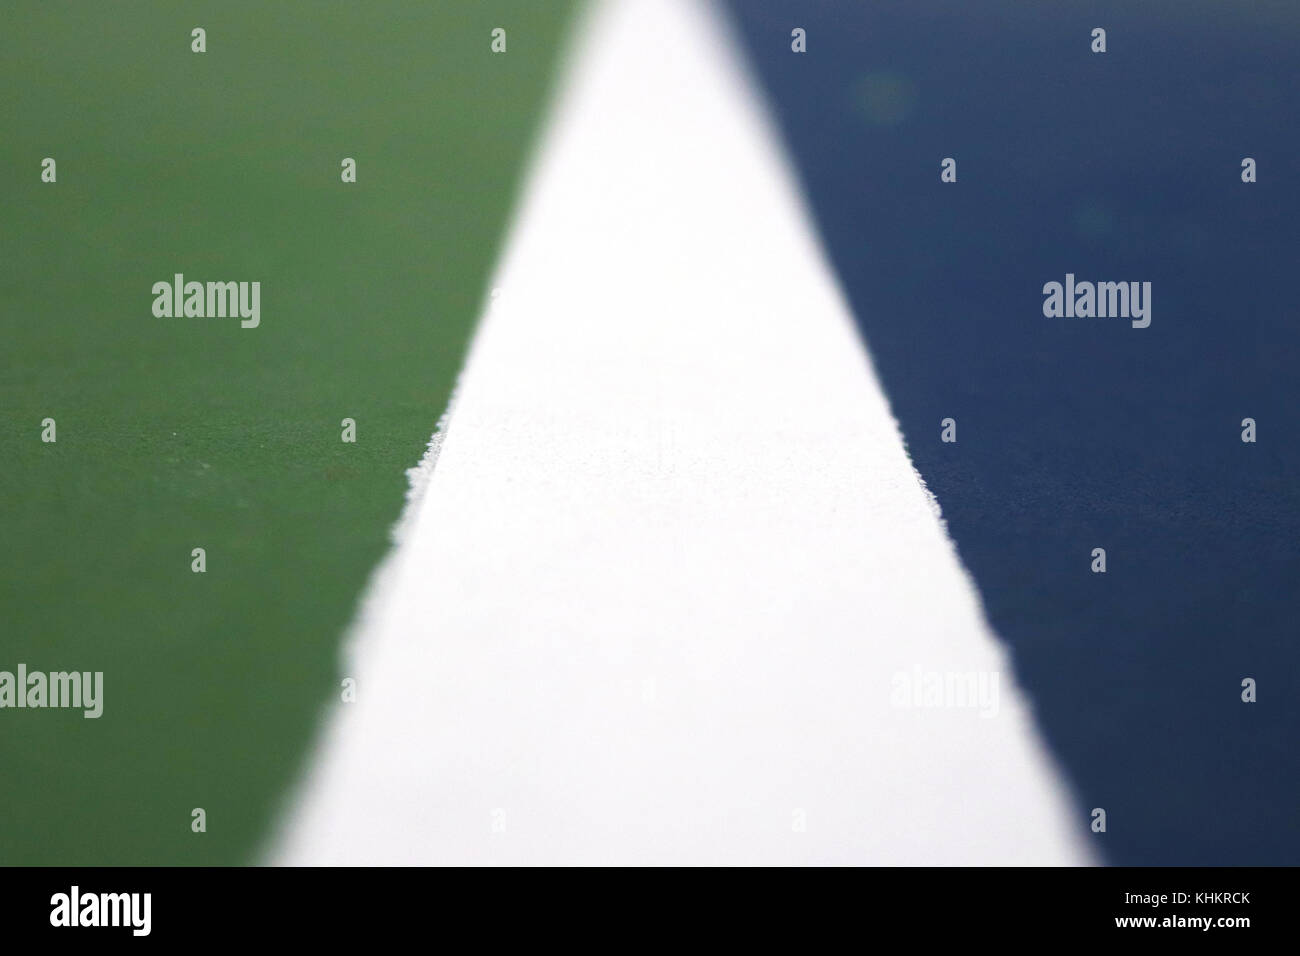 Tennis Playground Markup Line Background Texture. Focused Foreground with Blurred Background. Stock Photo